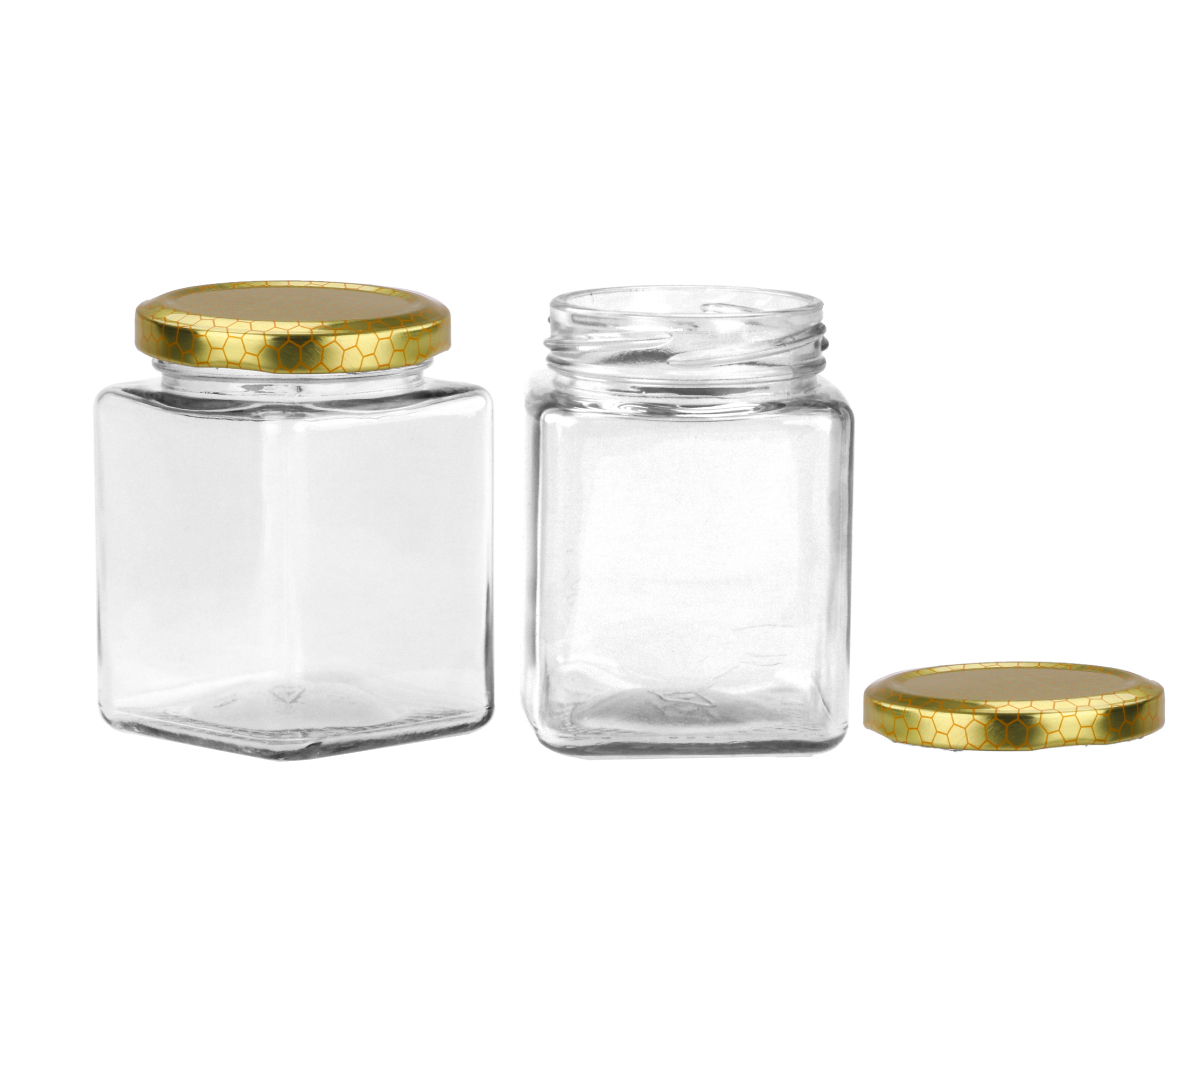 Square Glass Jar 280ml Glass Jars with Lid  Black, Gold, Nude or Silver